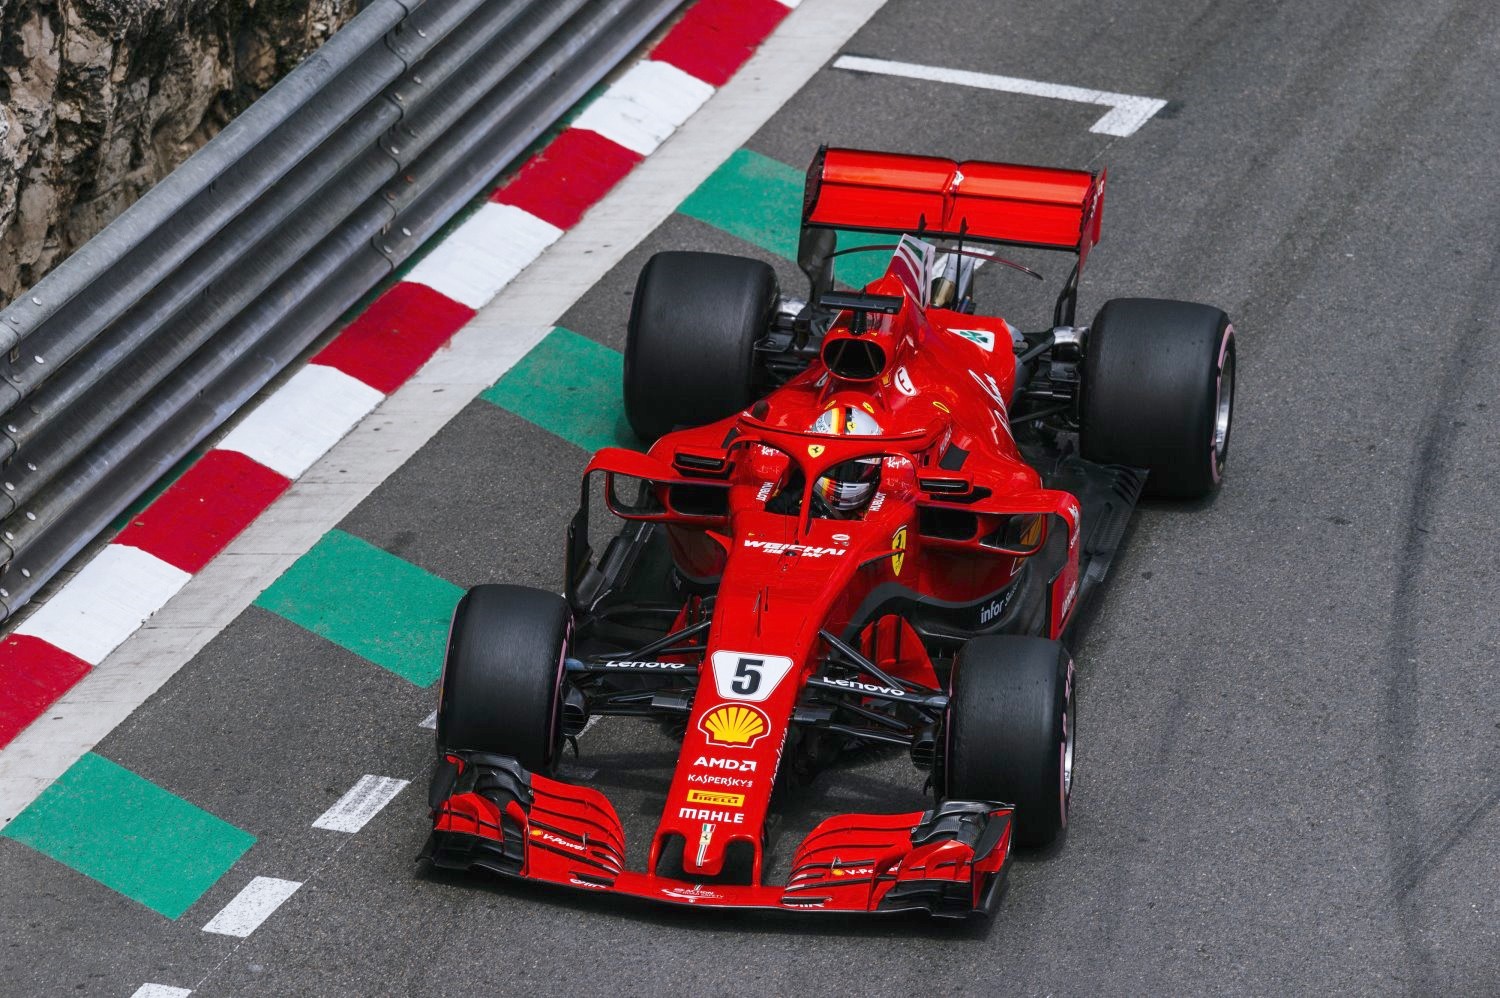 Vettel admits the Ferrari was fast, but not dominant like the Mercedes was at some races